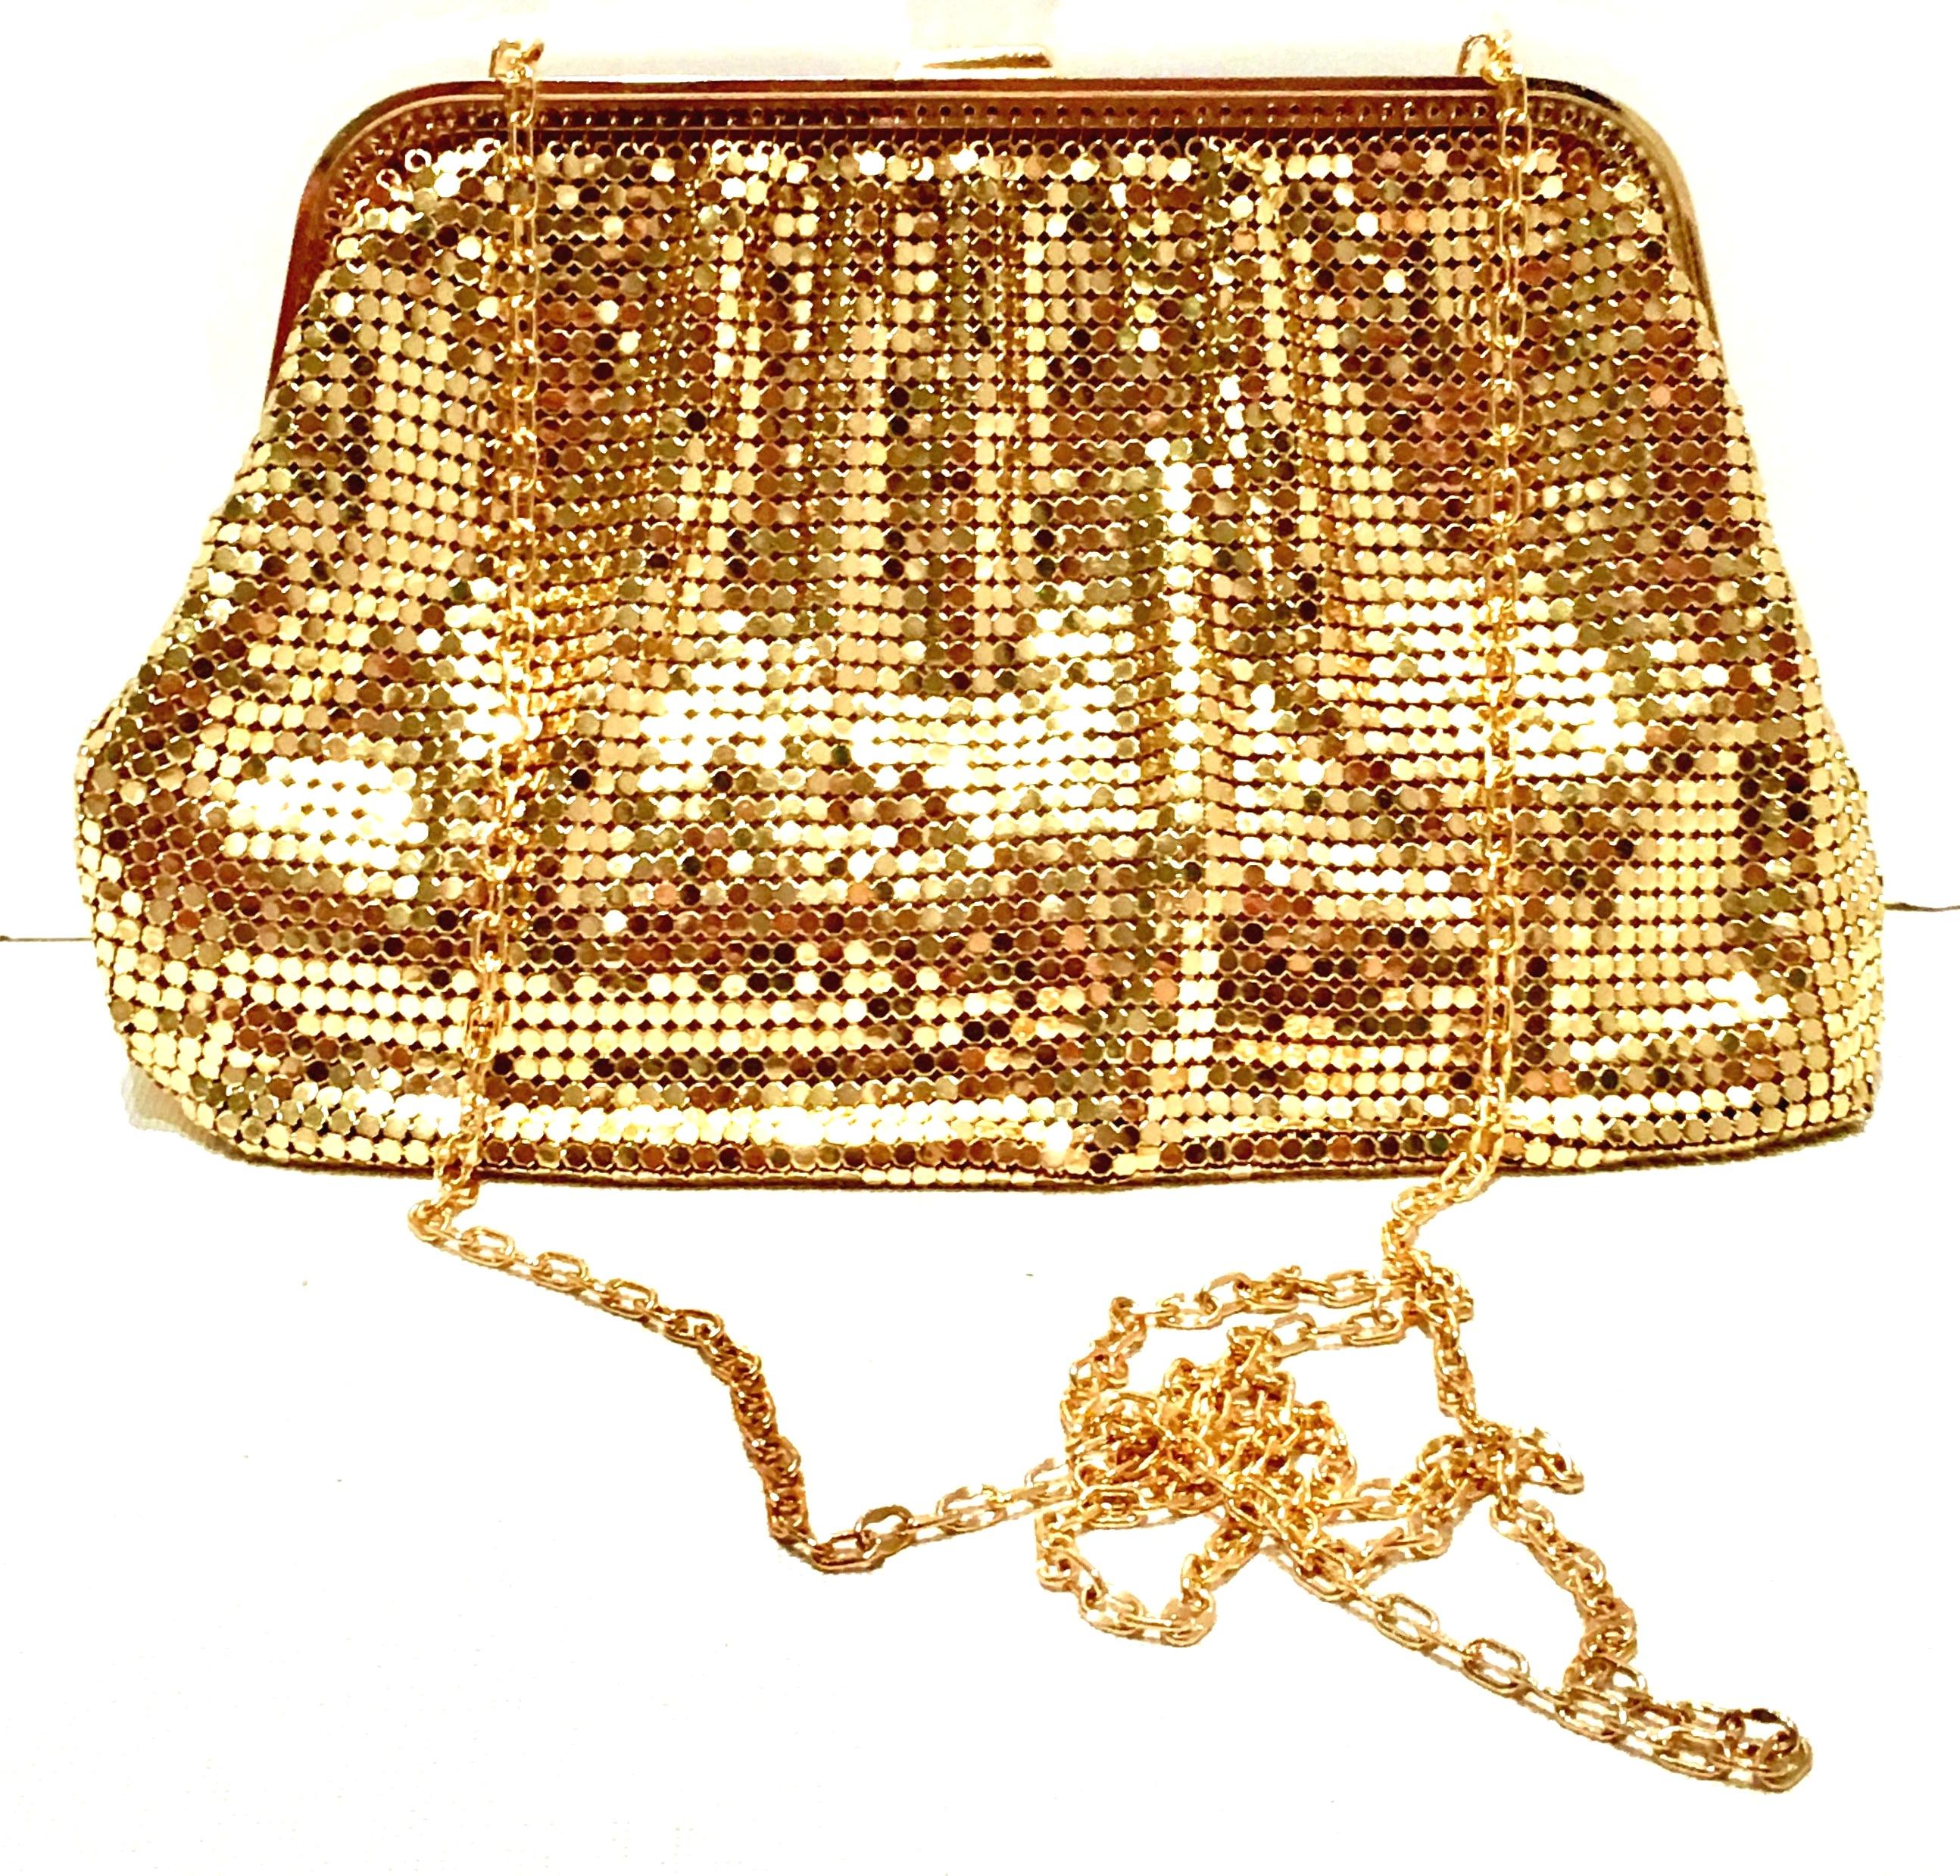 Brown 20th Century Gold Metal Mesh & Swarovksi Crystal Evening Bag By, Whiting & Davis For Sale